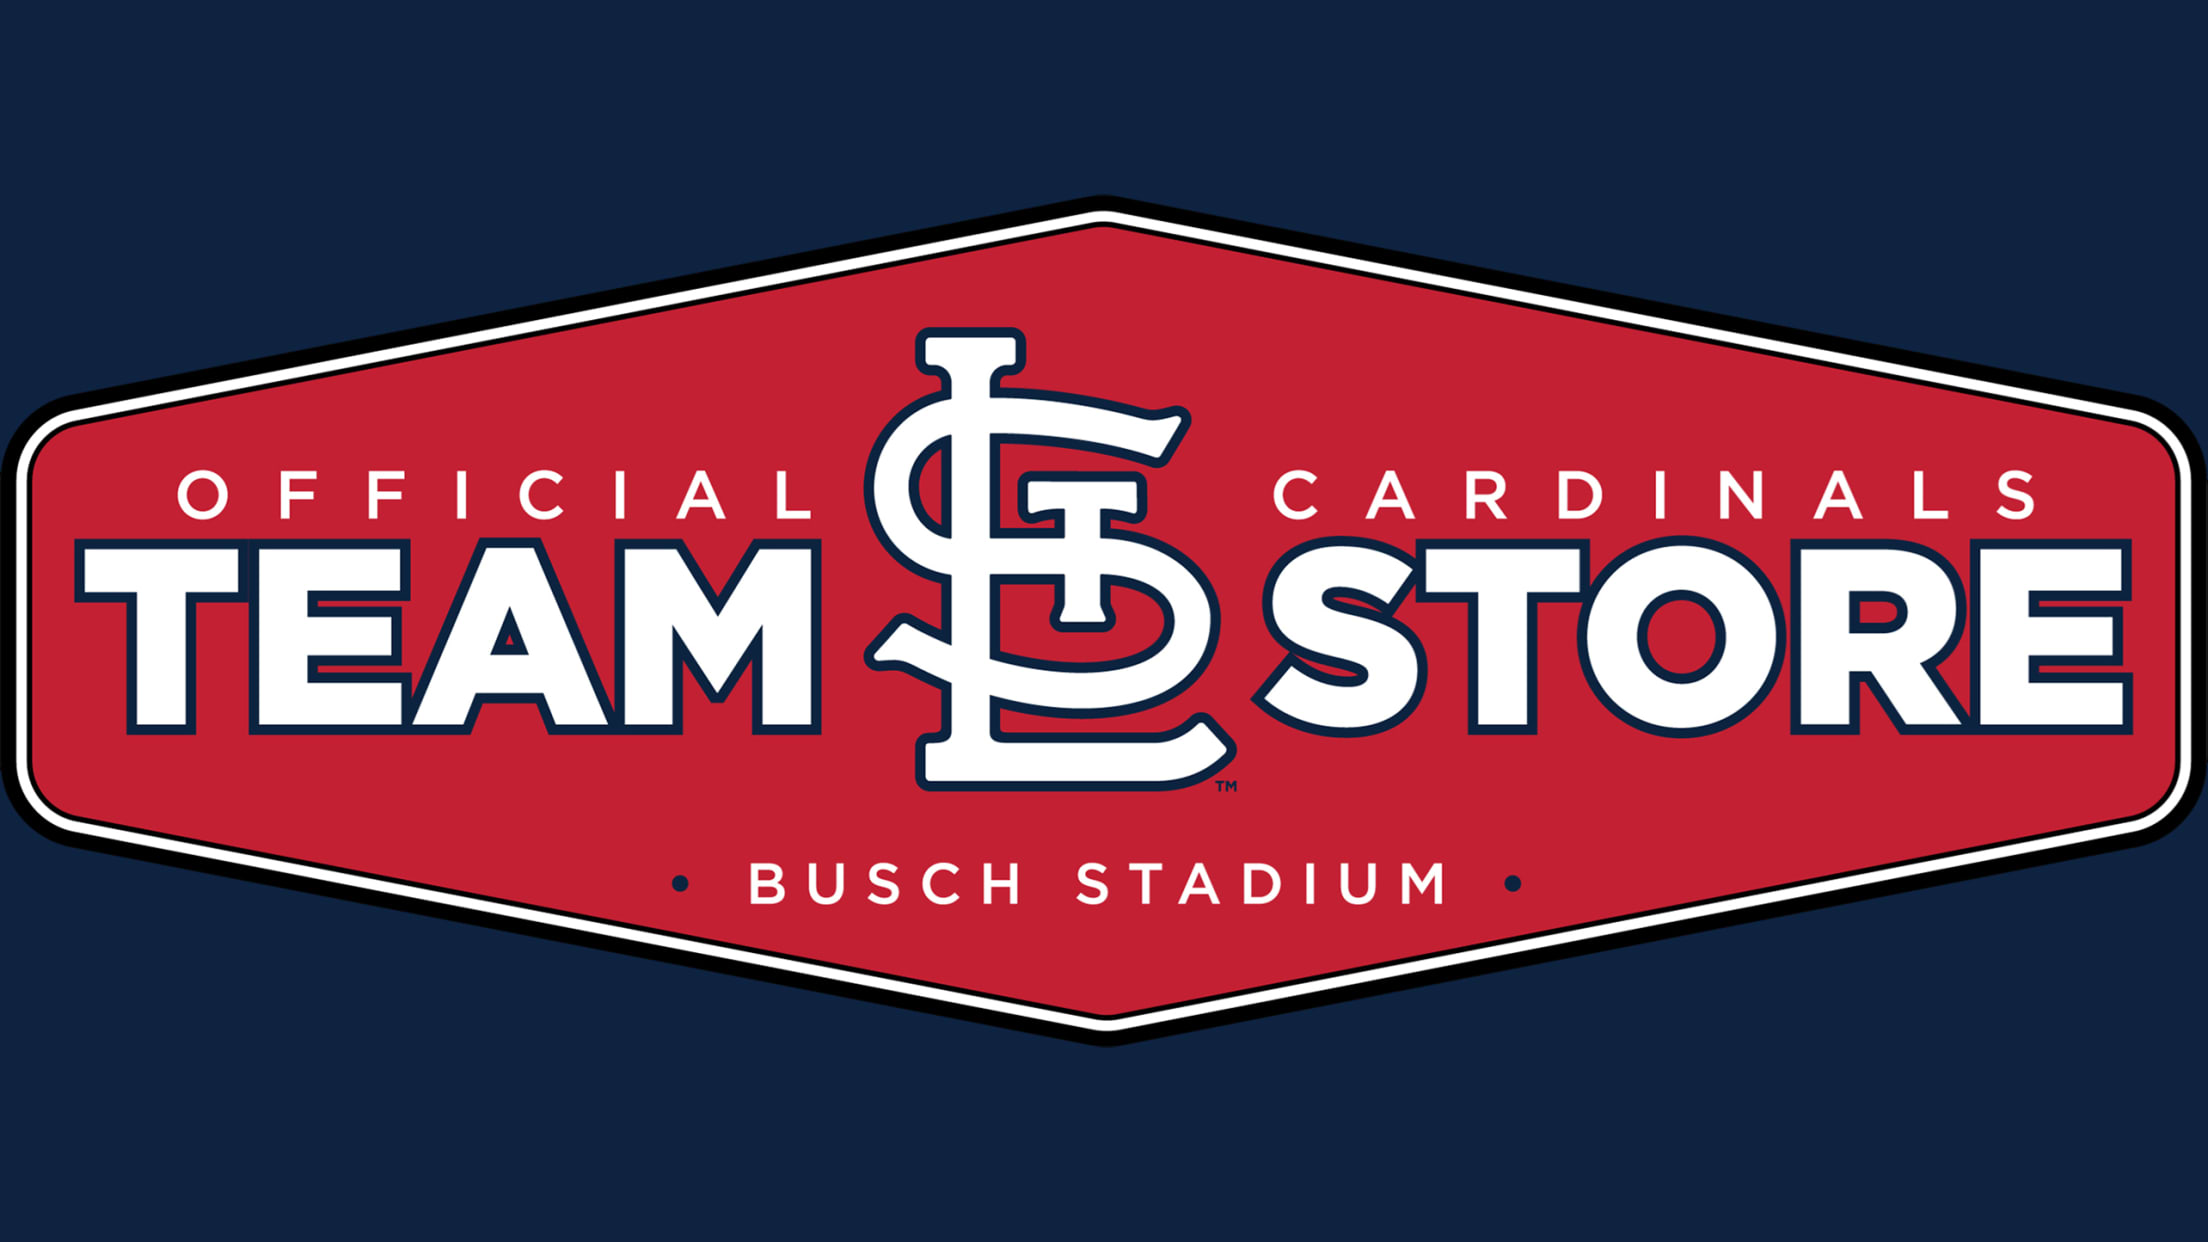 Winter Wonderland: Holiday St. Louis Cardinals gifts for fans